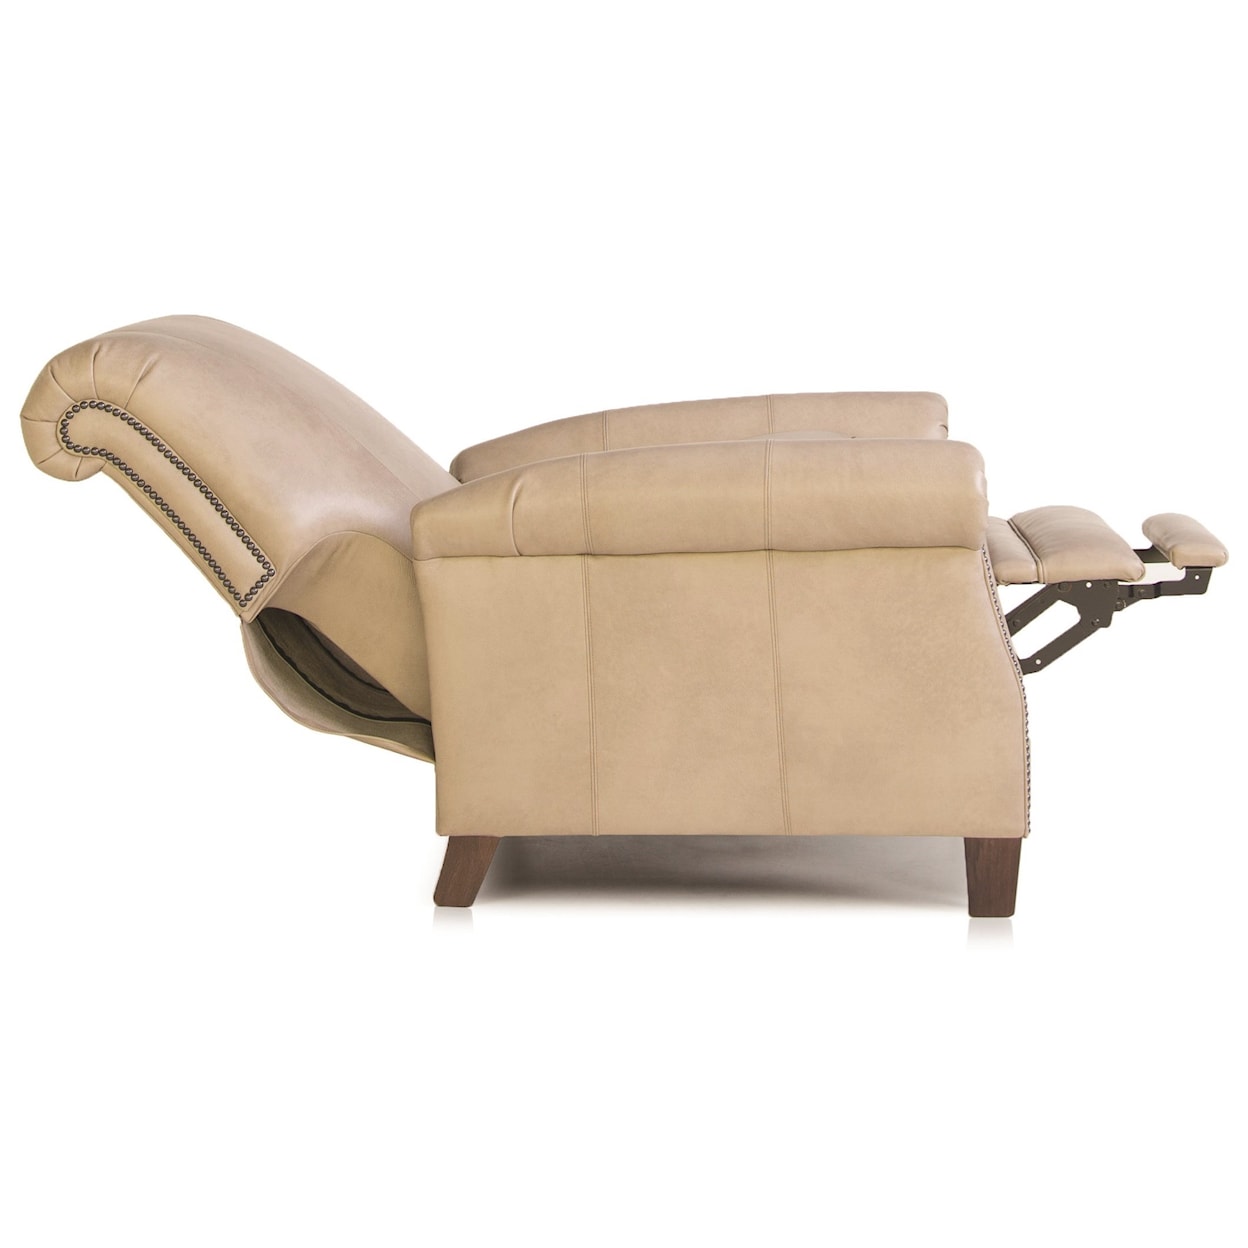 Smith Brothers 704 High Leg Pressback Recliner